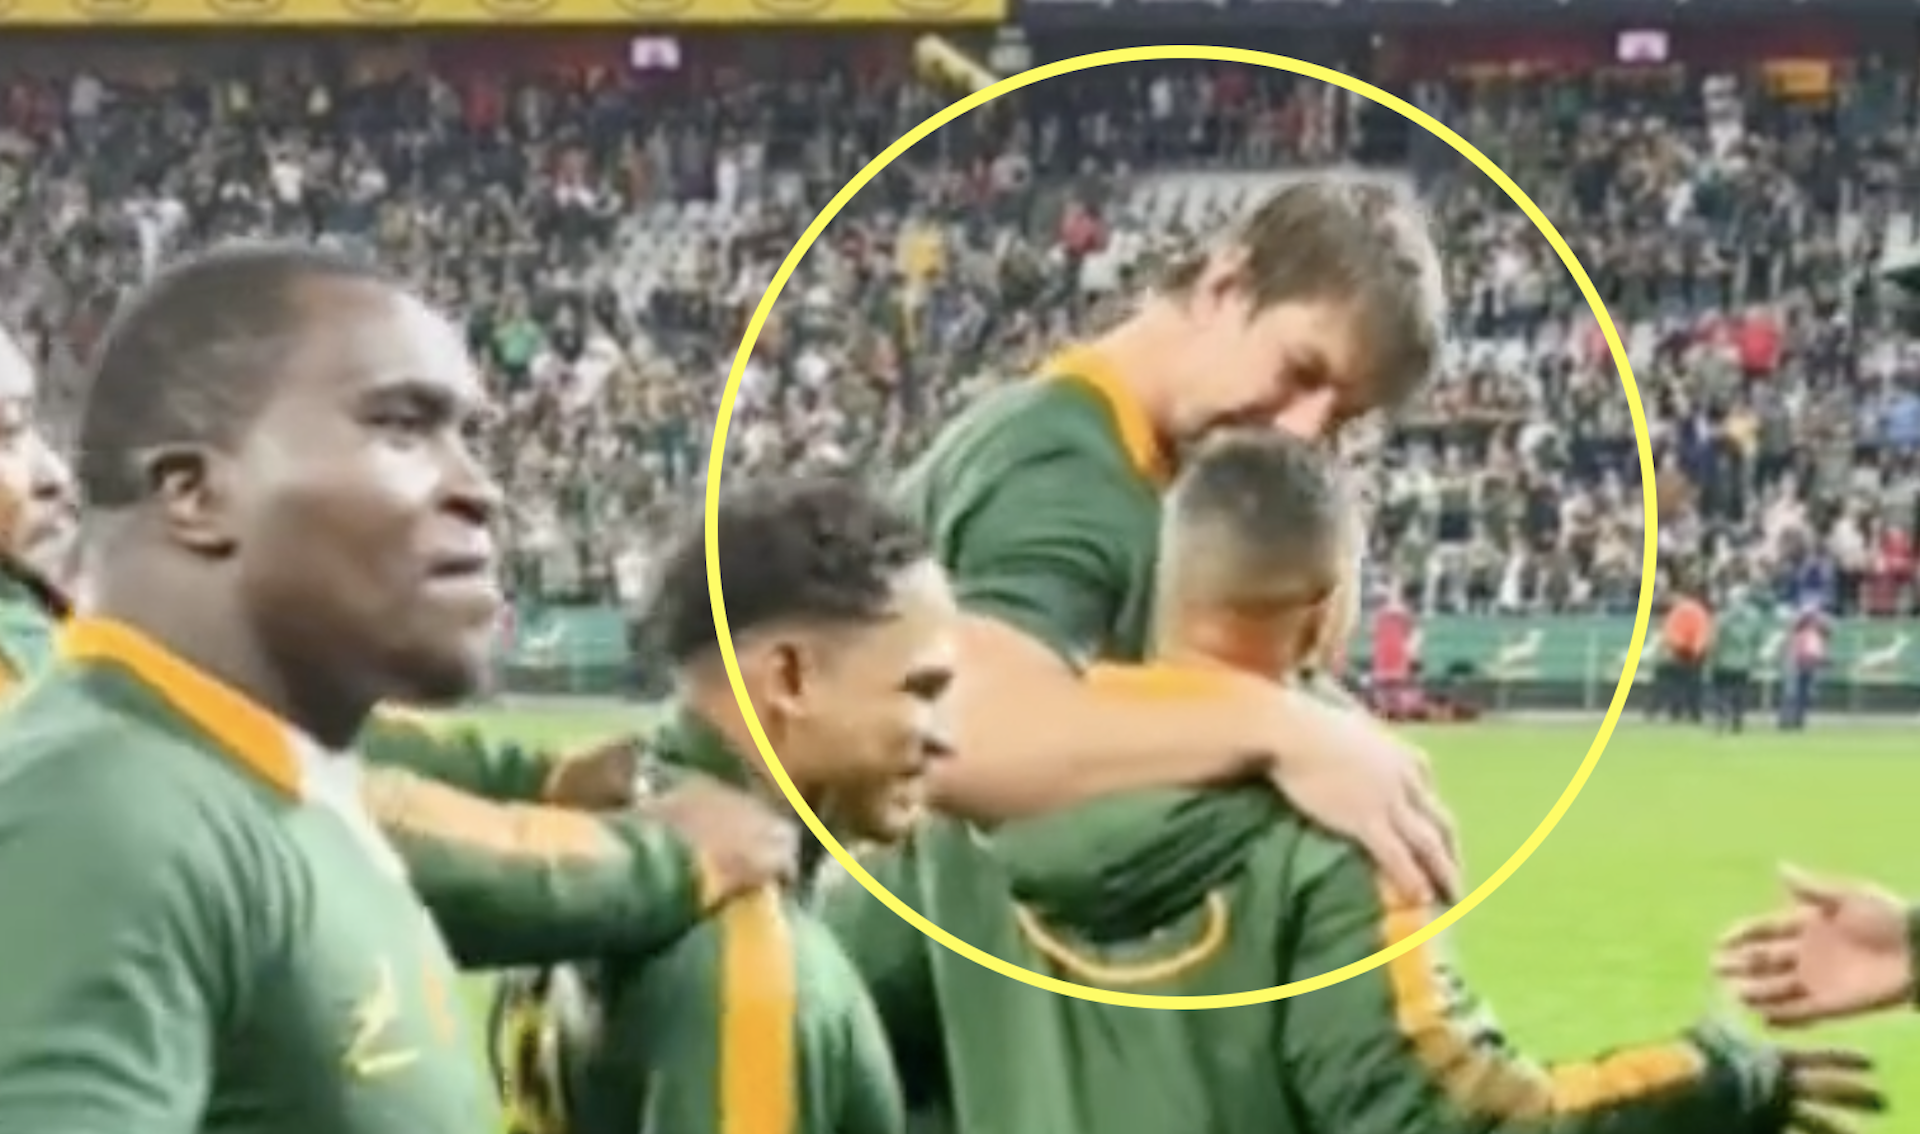 Cheslin Kolbe leaves Eben Etzebeth shocked and disgusted